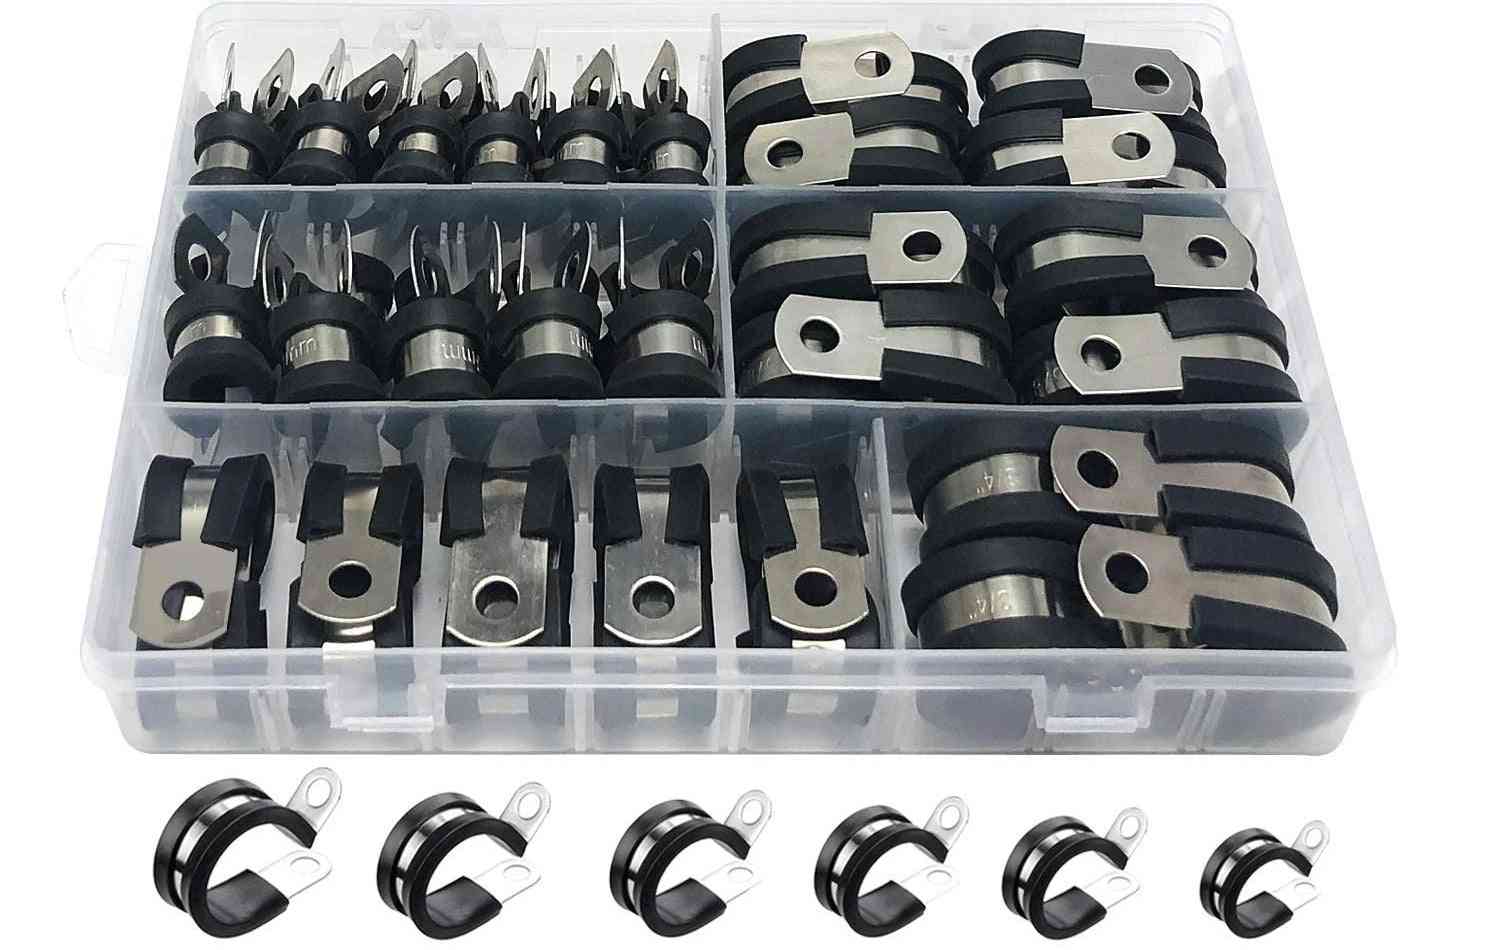 Rubber Cushion Insulated Stainless Steel Metal Clamp Assortment Kit